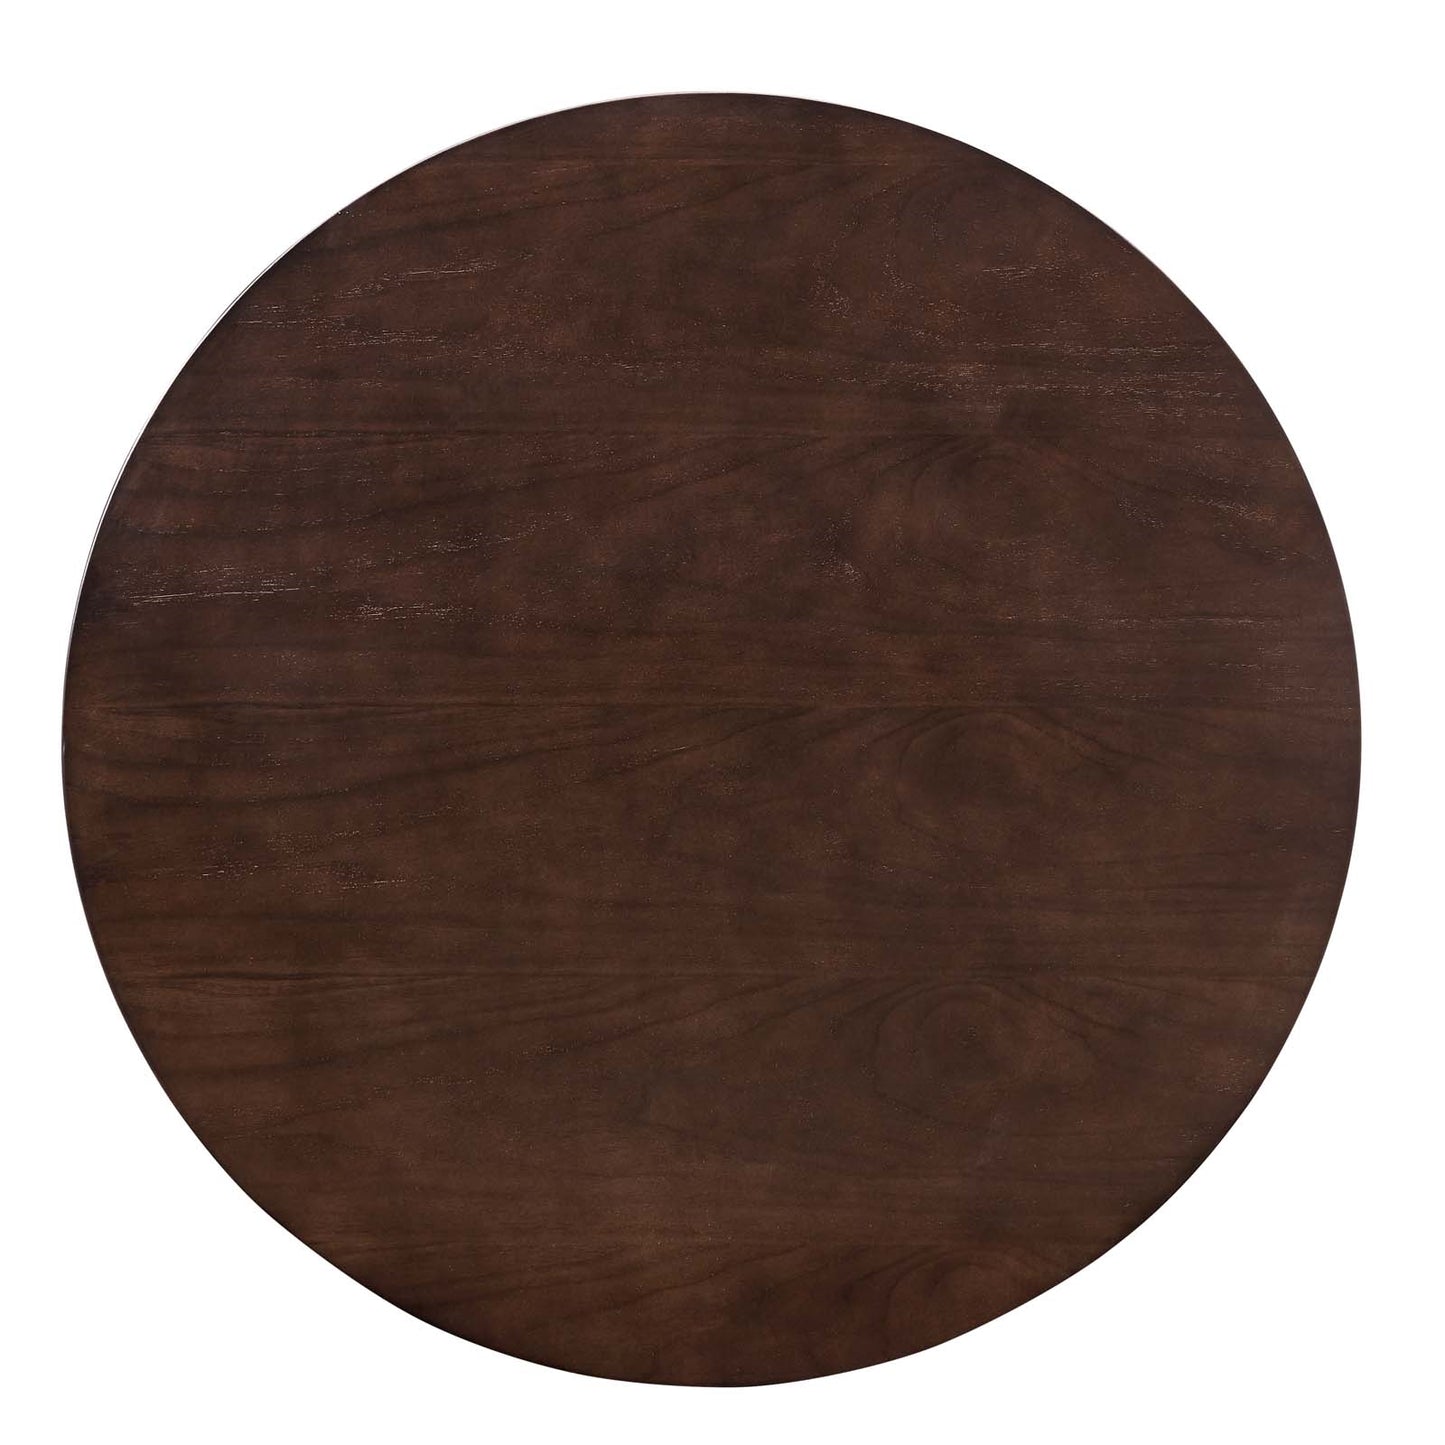 Tulip Style 36" Wood Dining Table in Black Cherry Walnut